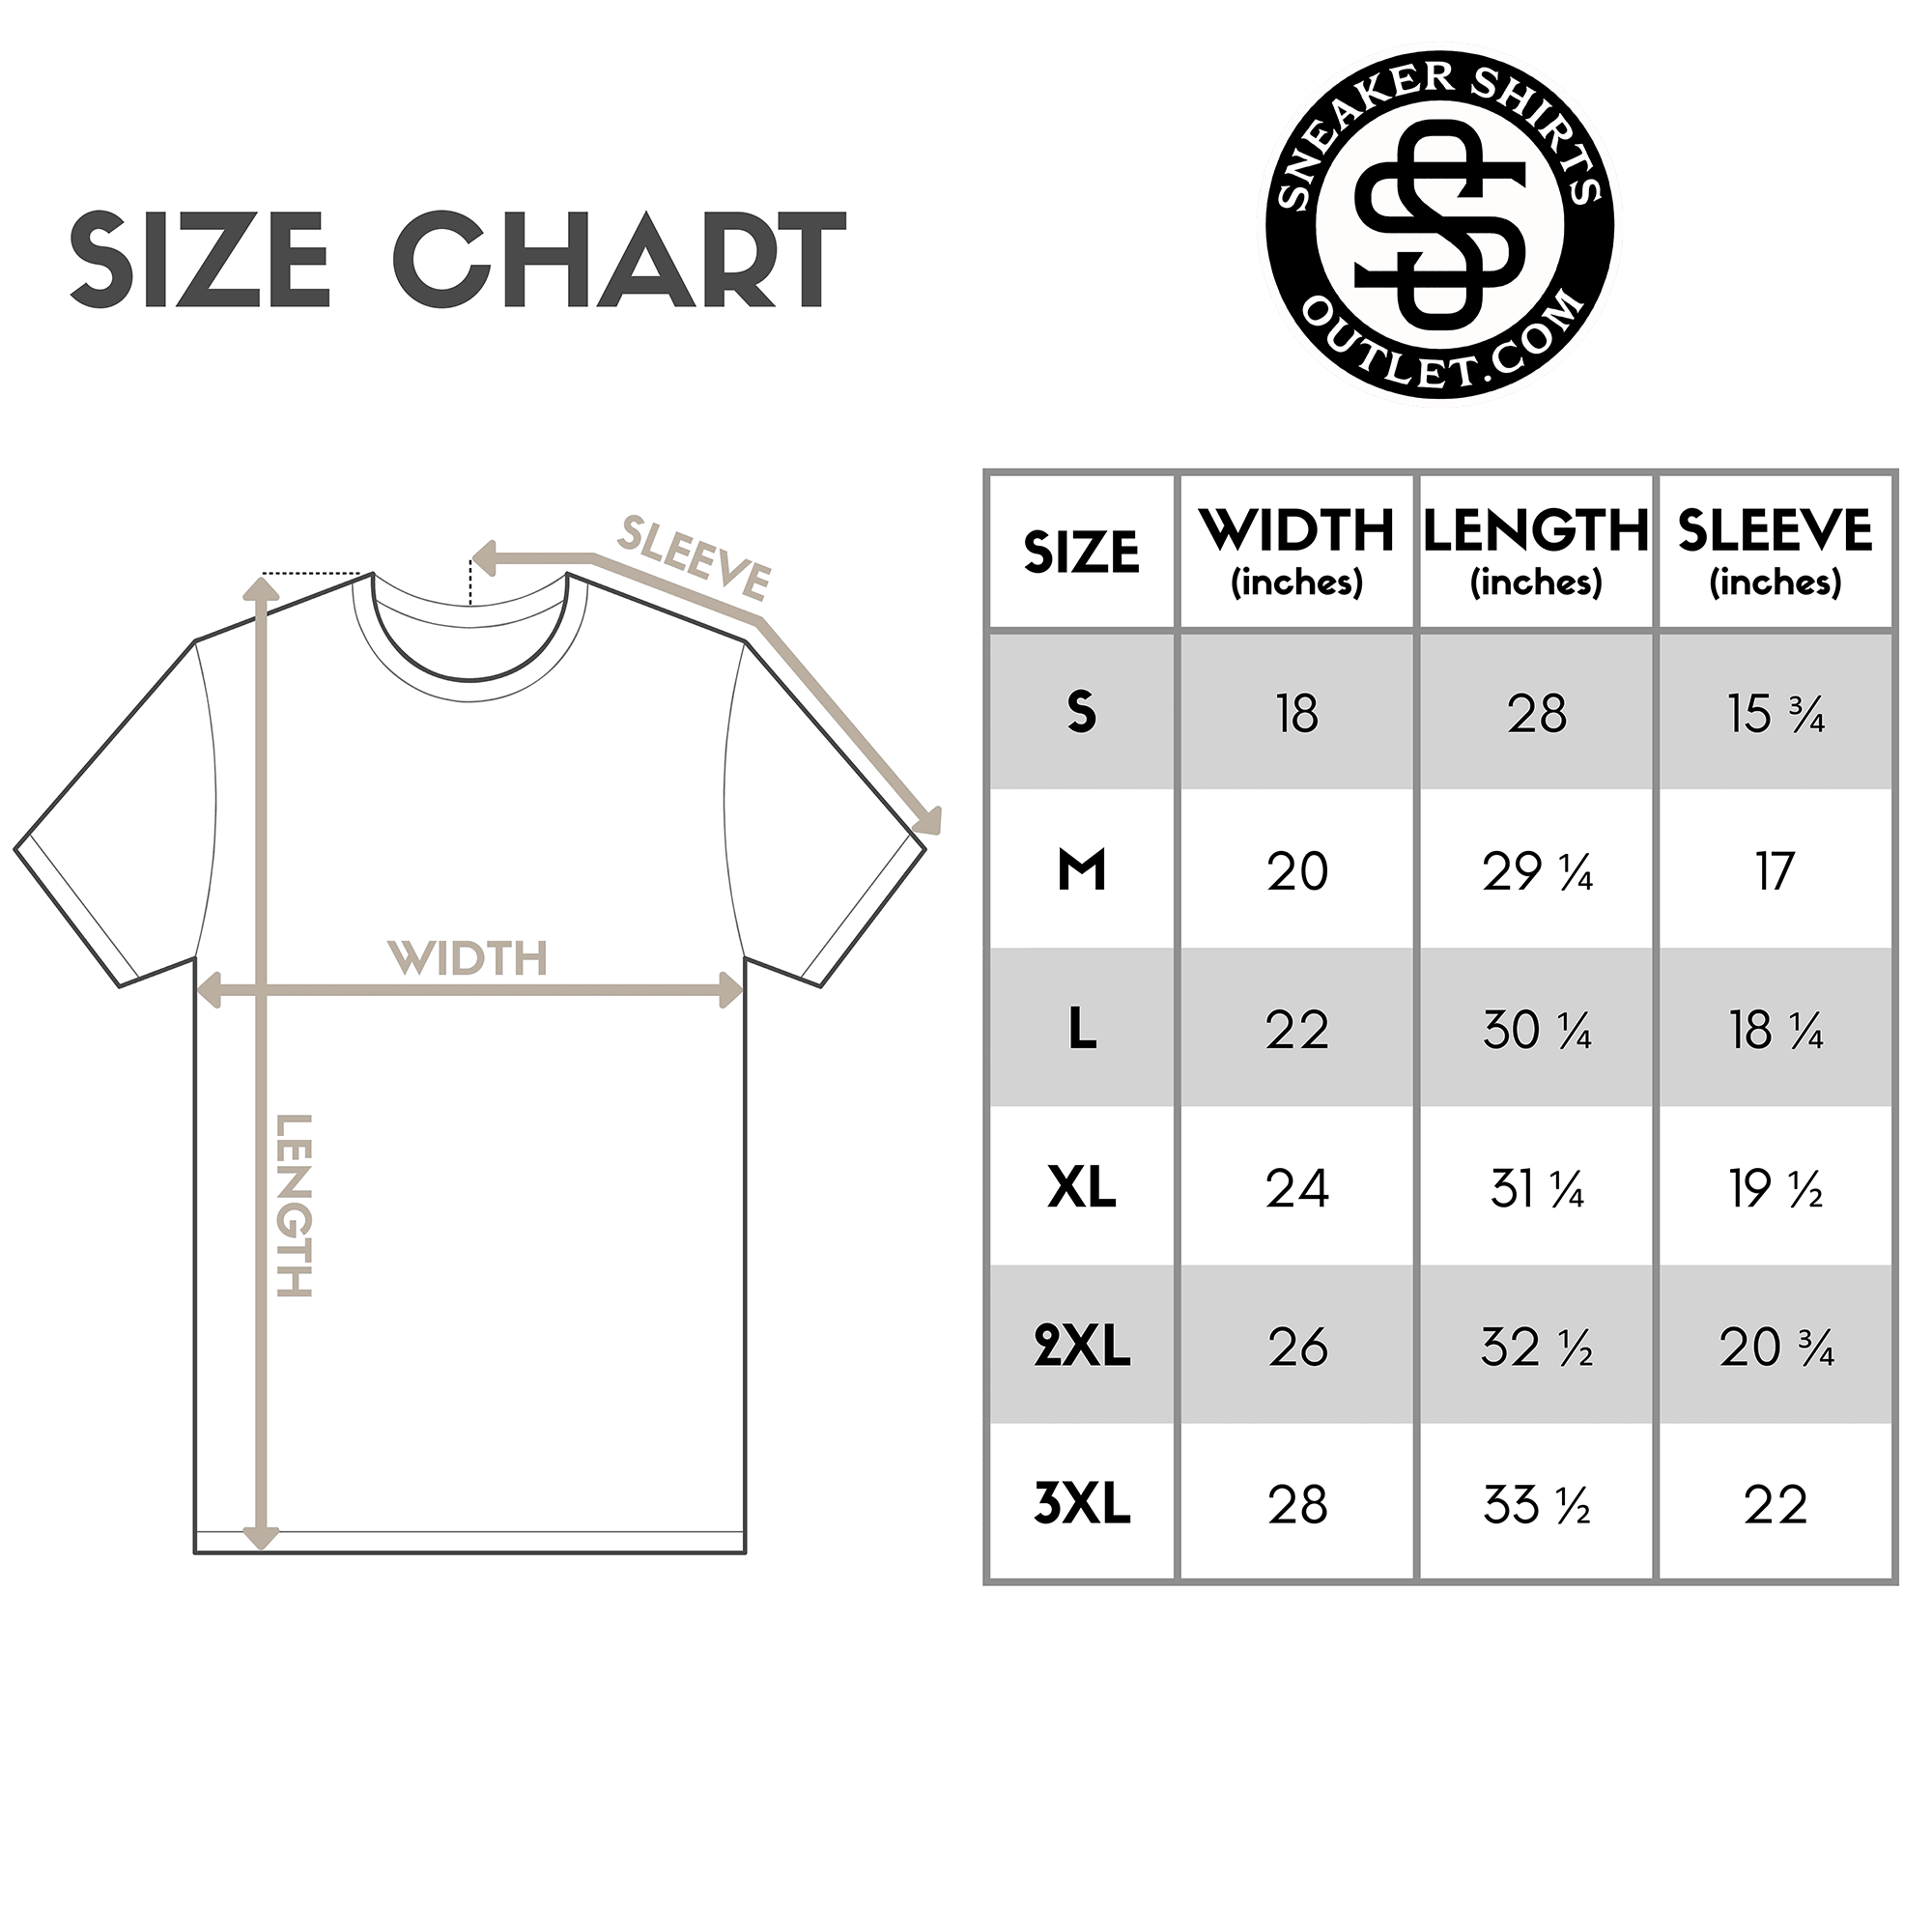 Voodoo Shirt by Dope Star Clothing® size chart photo